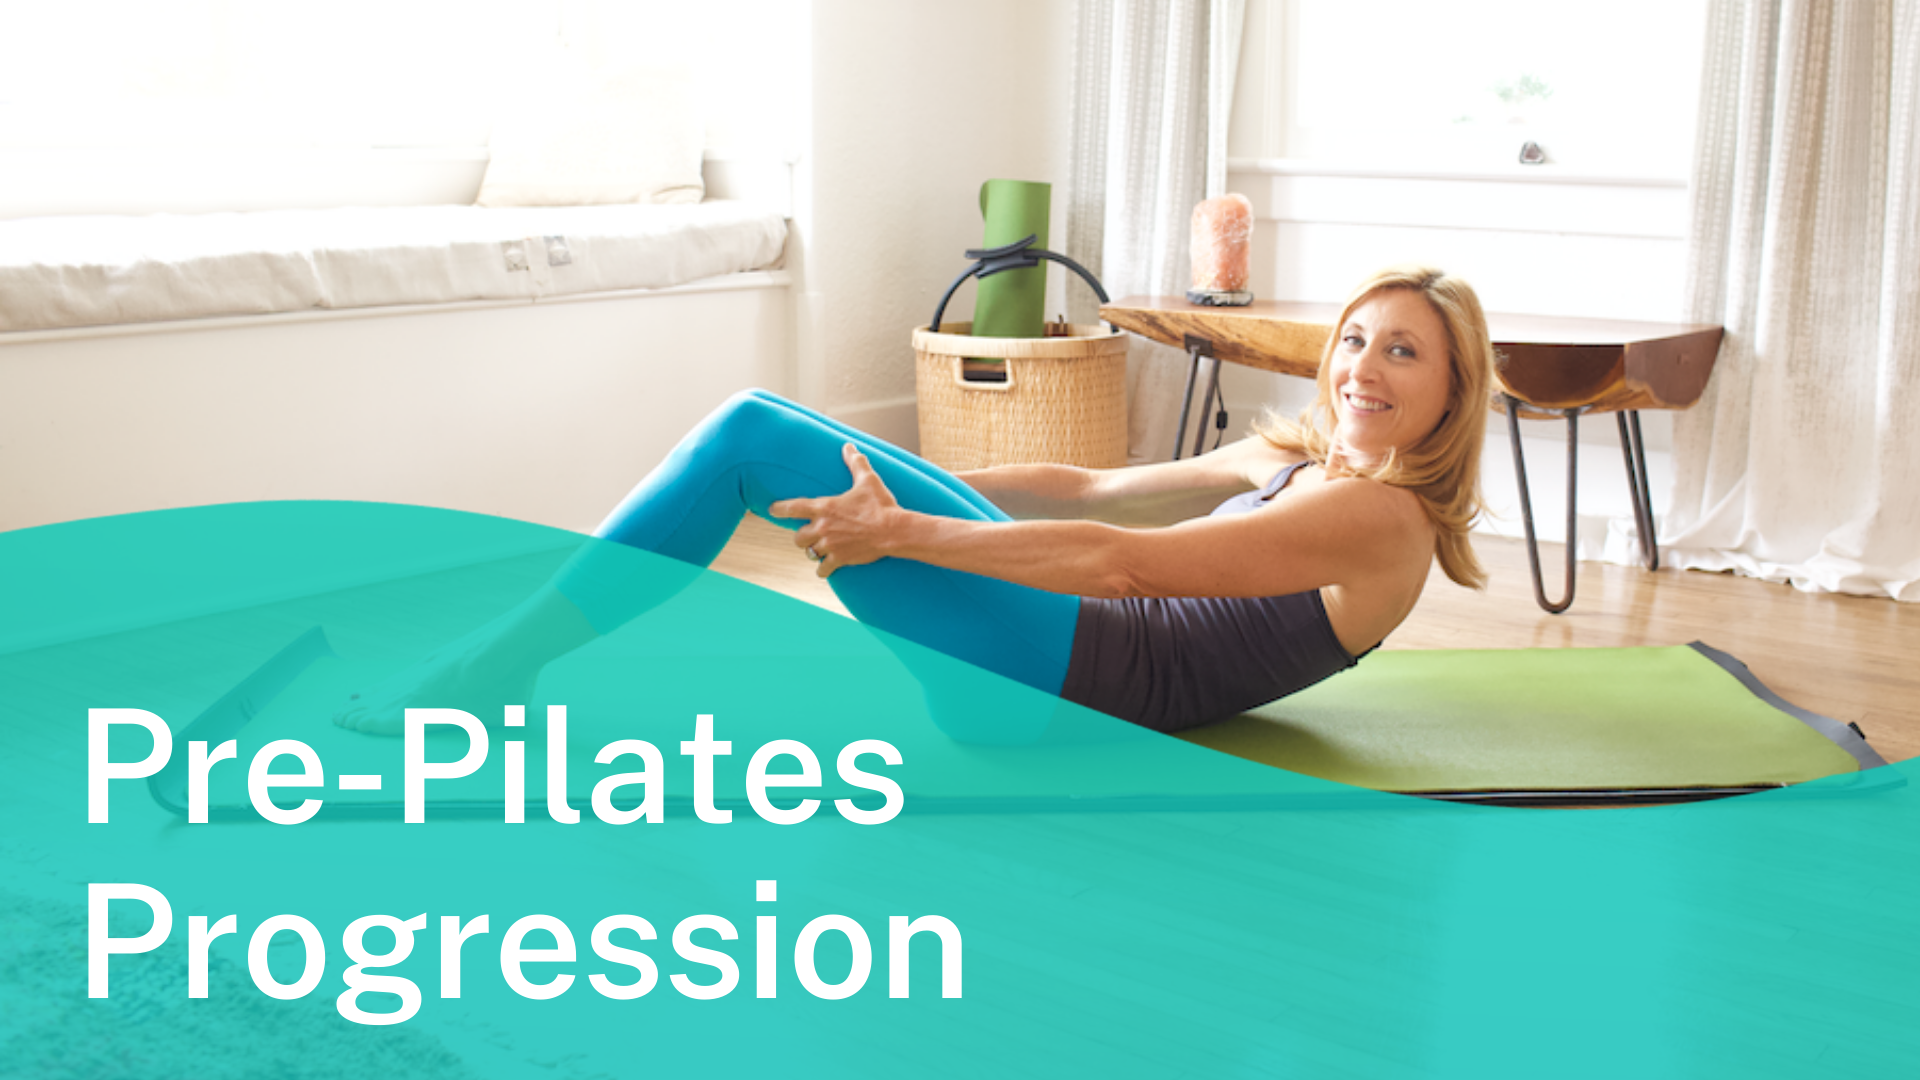 Pilates workout series for beginners